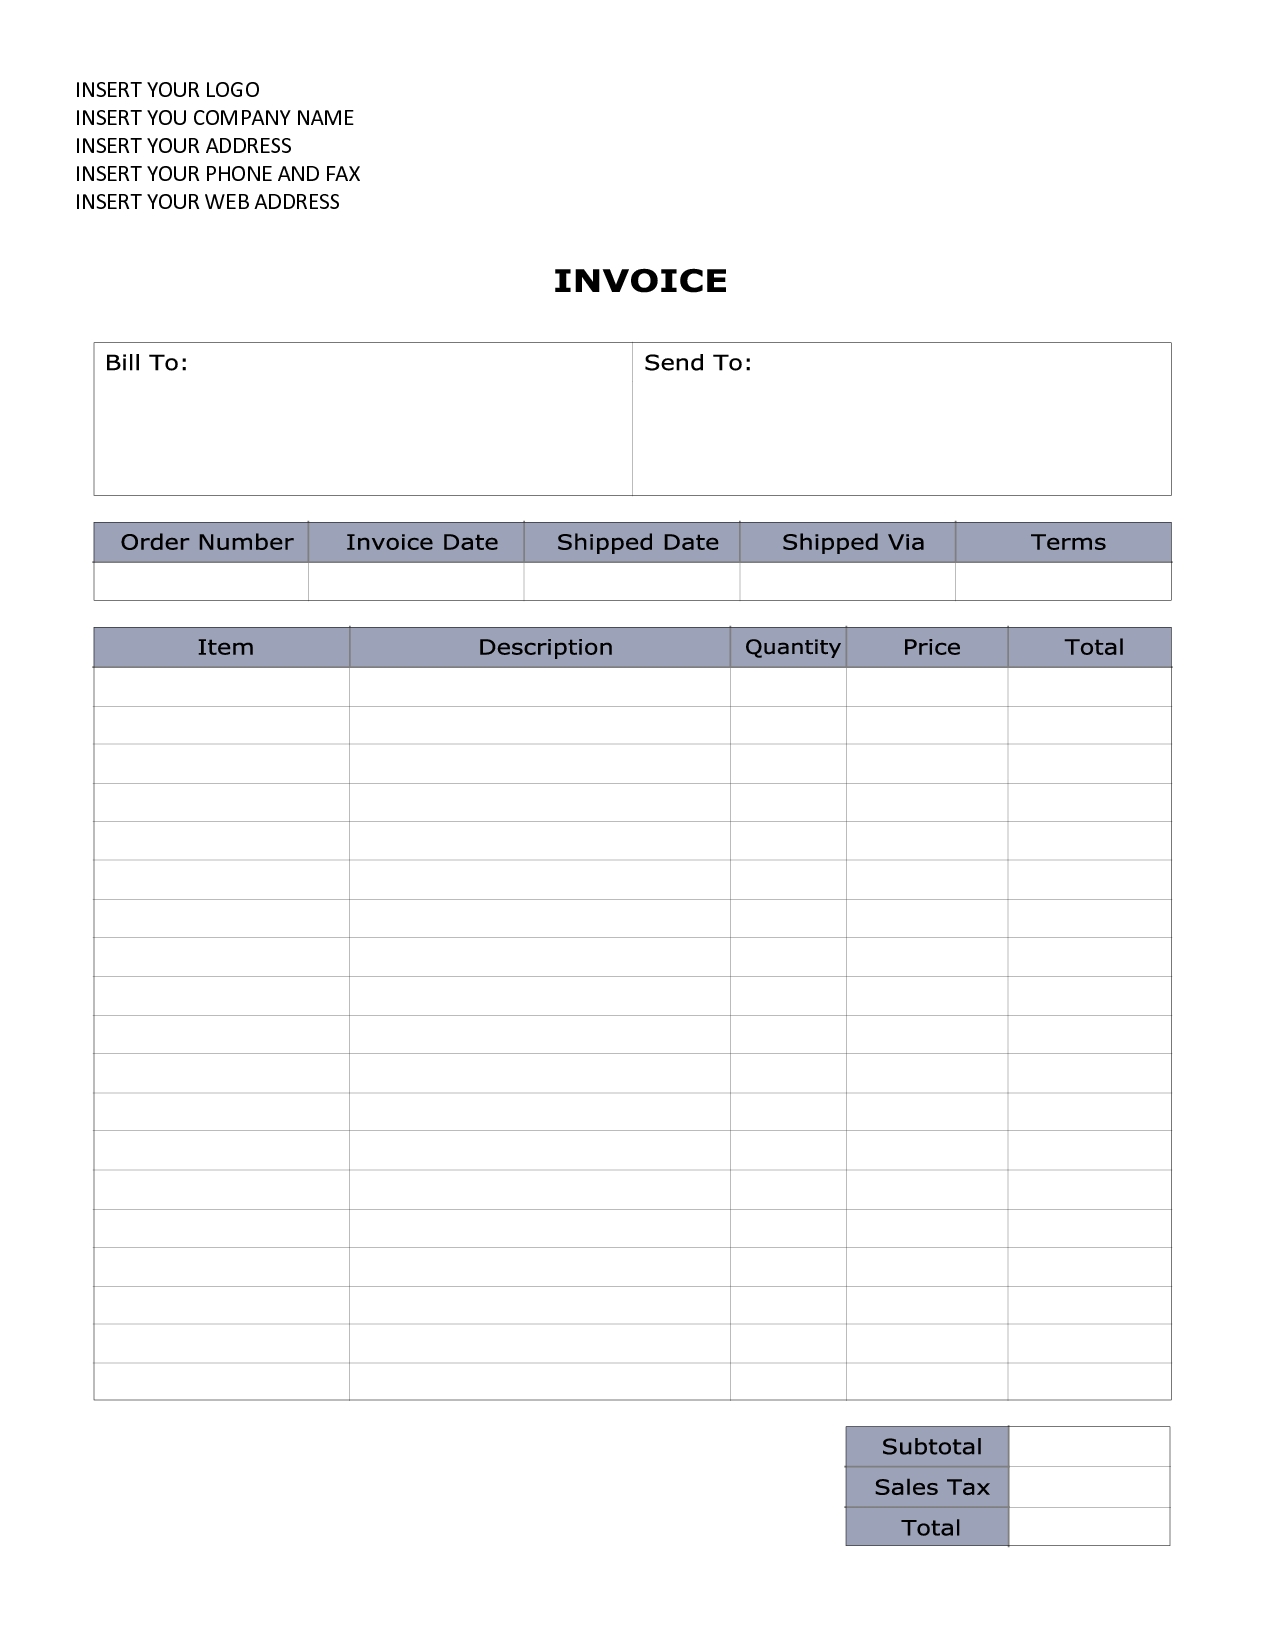 Is there a billing invoice template in word